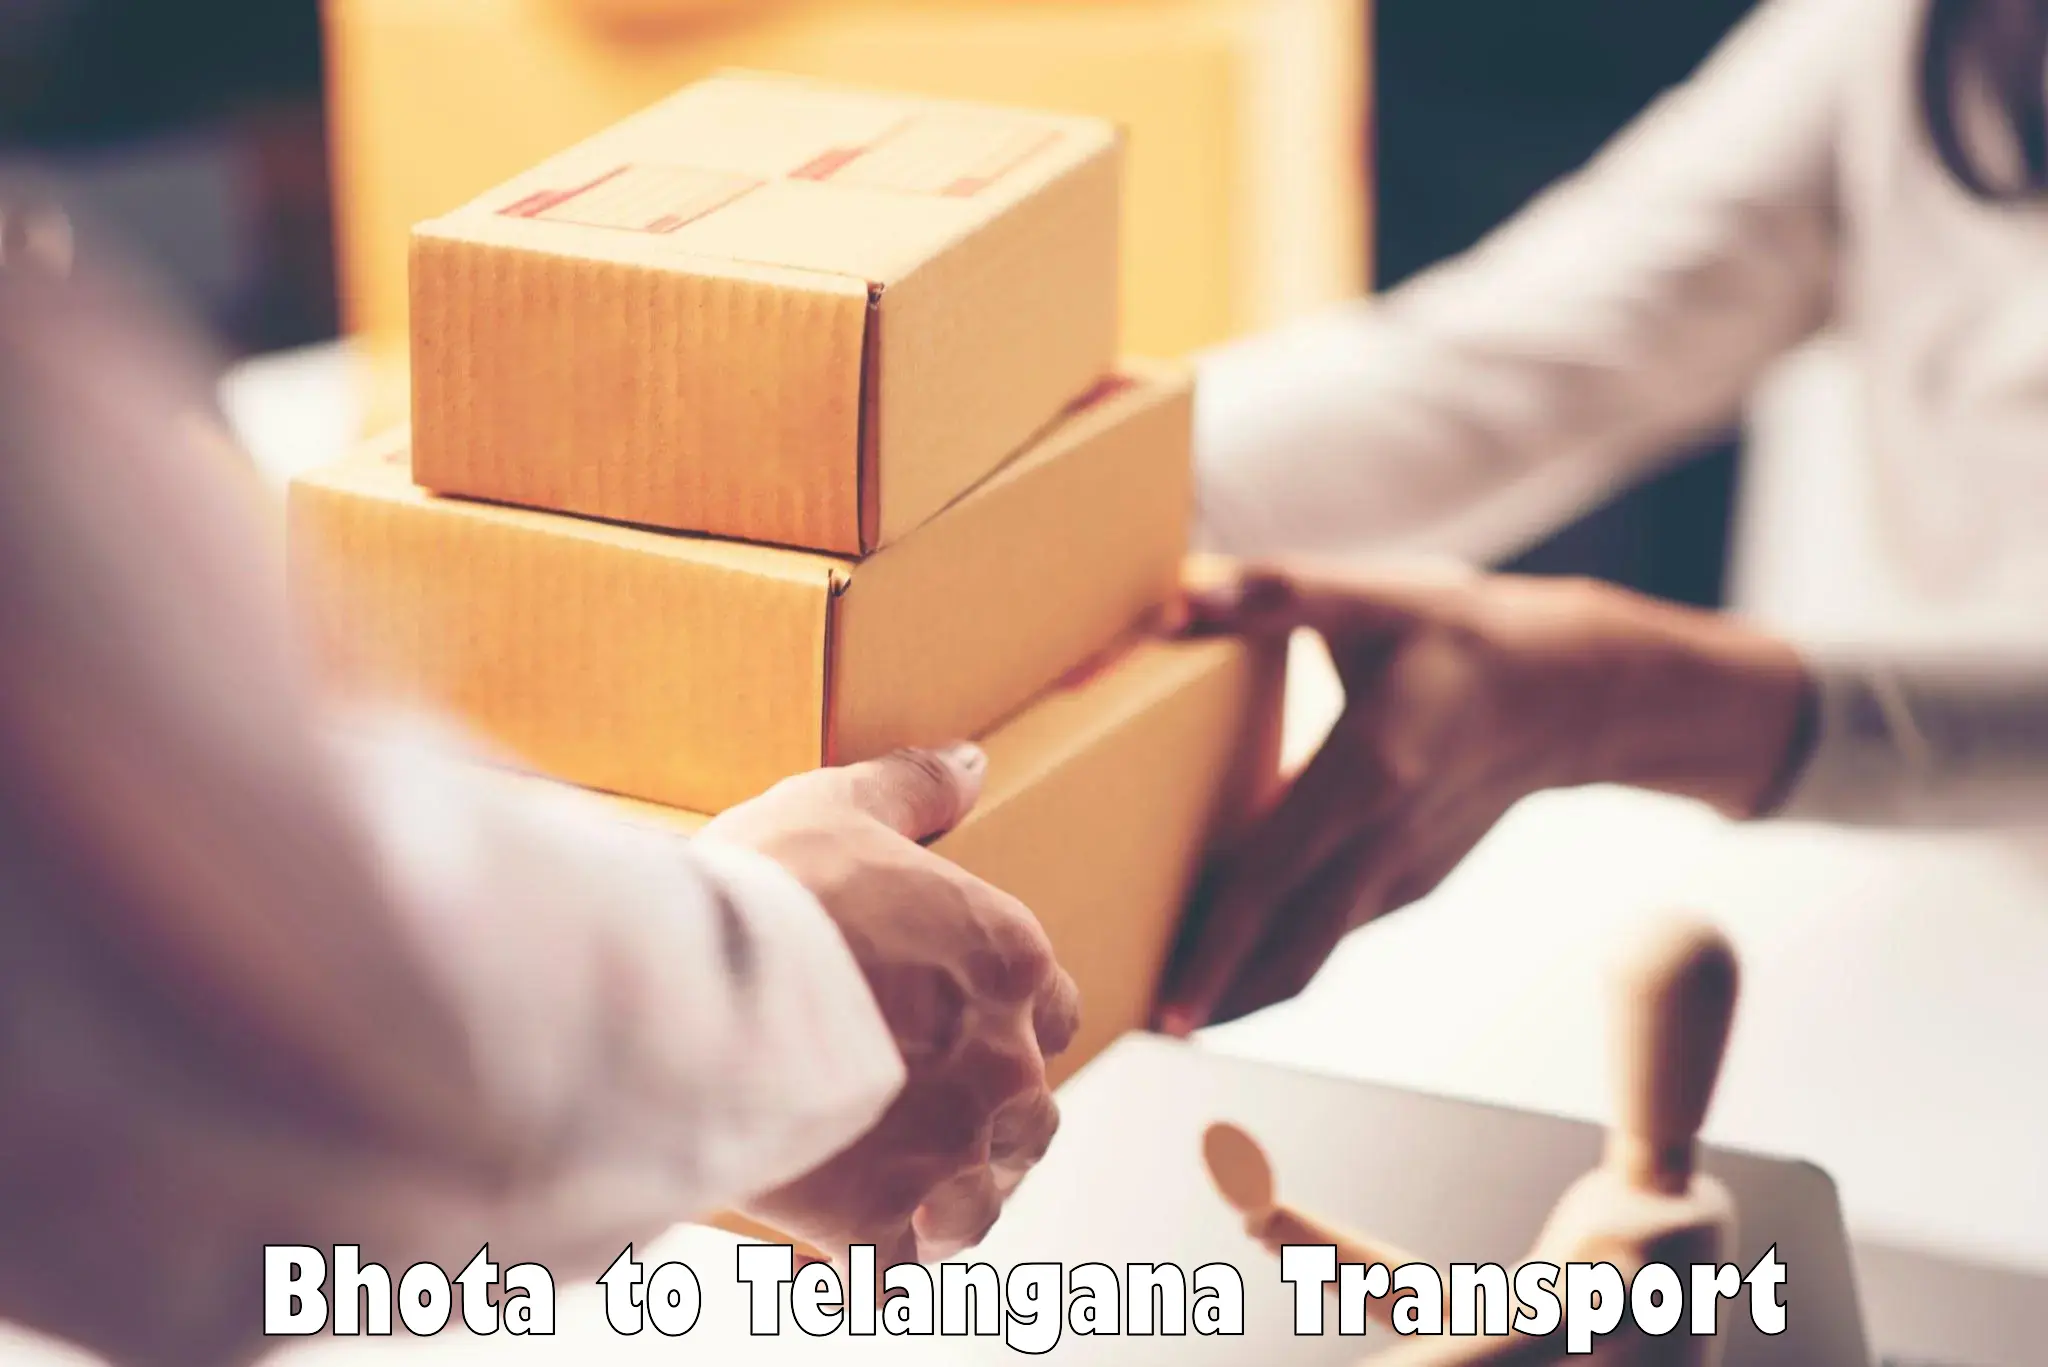 Shipping services in Bhota to Vikarabad